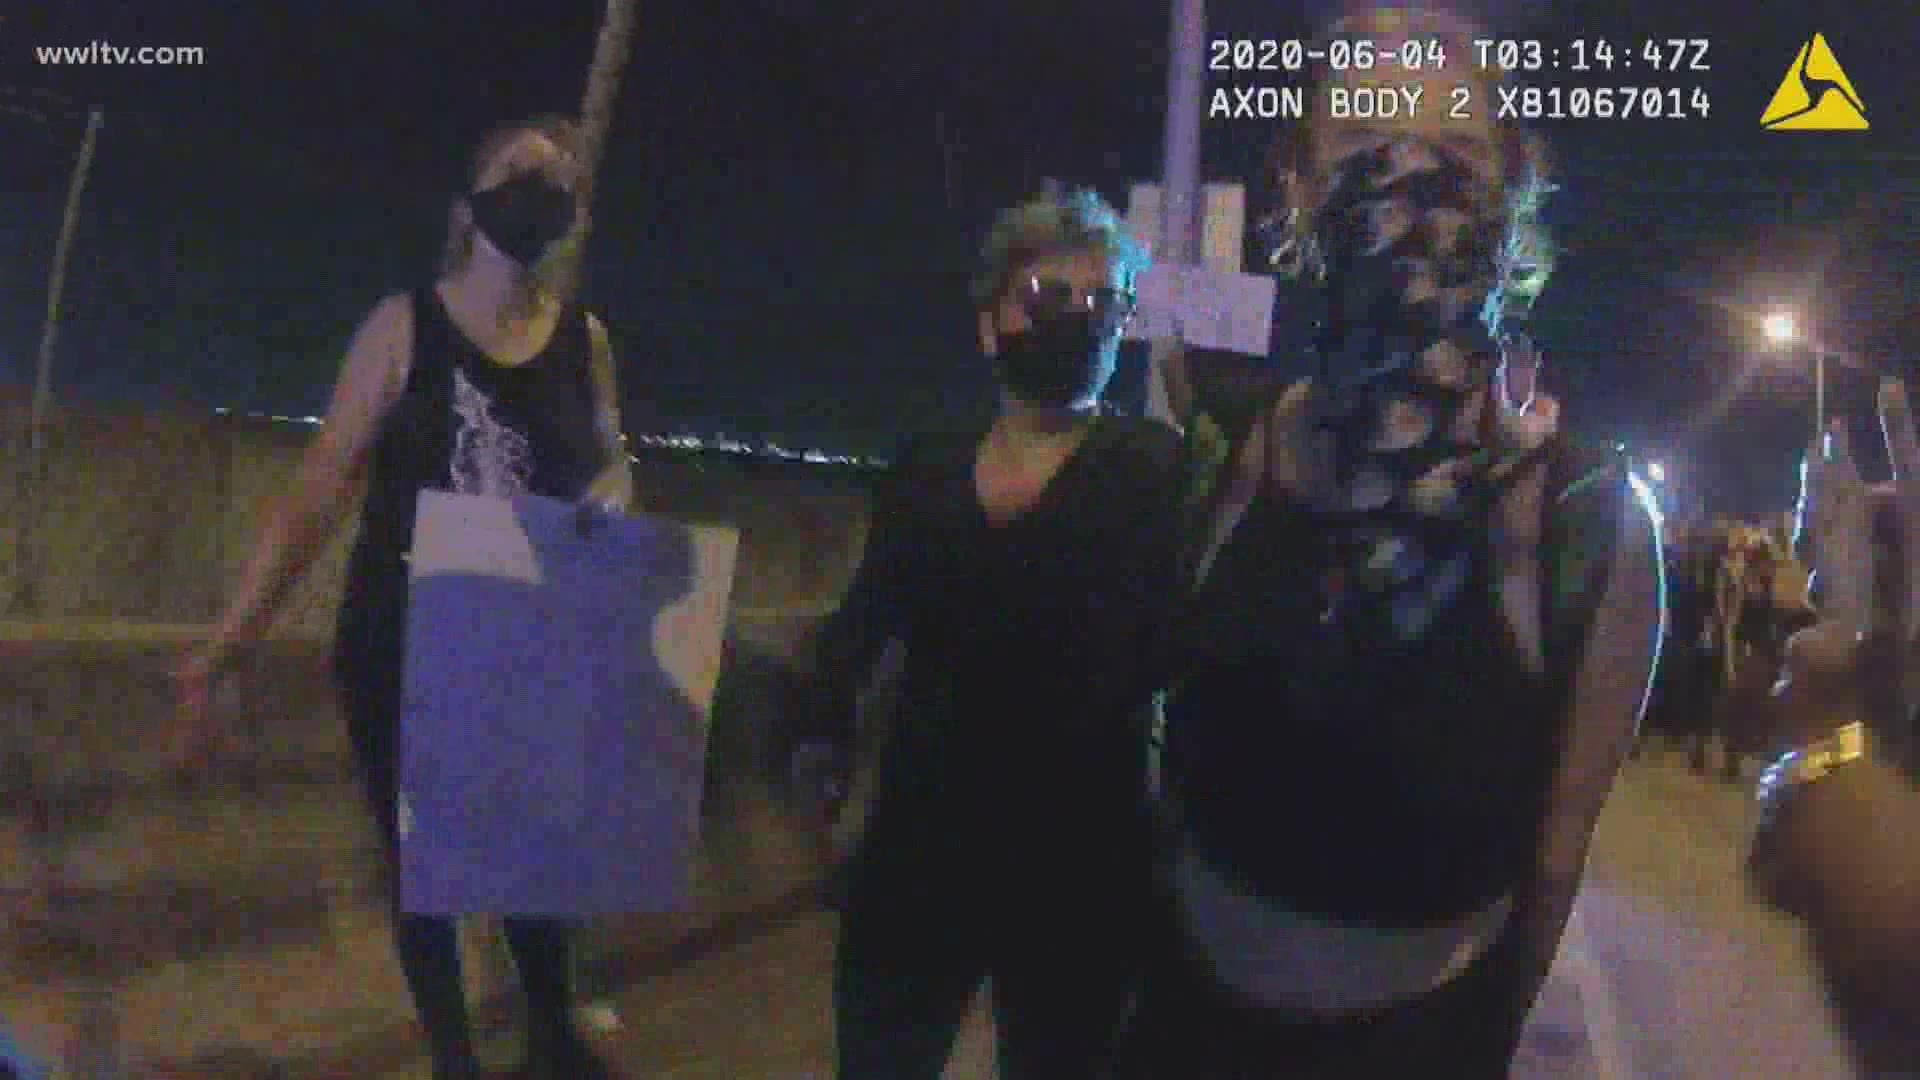 Video shows a group of protestors breaking through two police lines on the CCC before tear gas canisters were deployed.